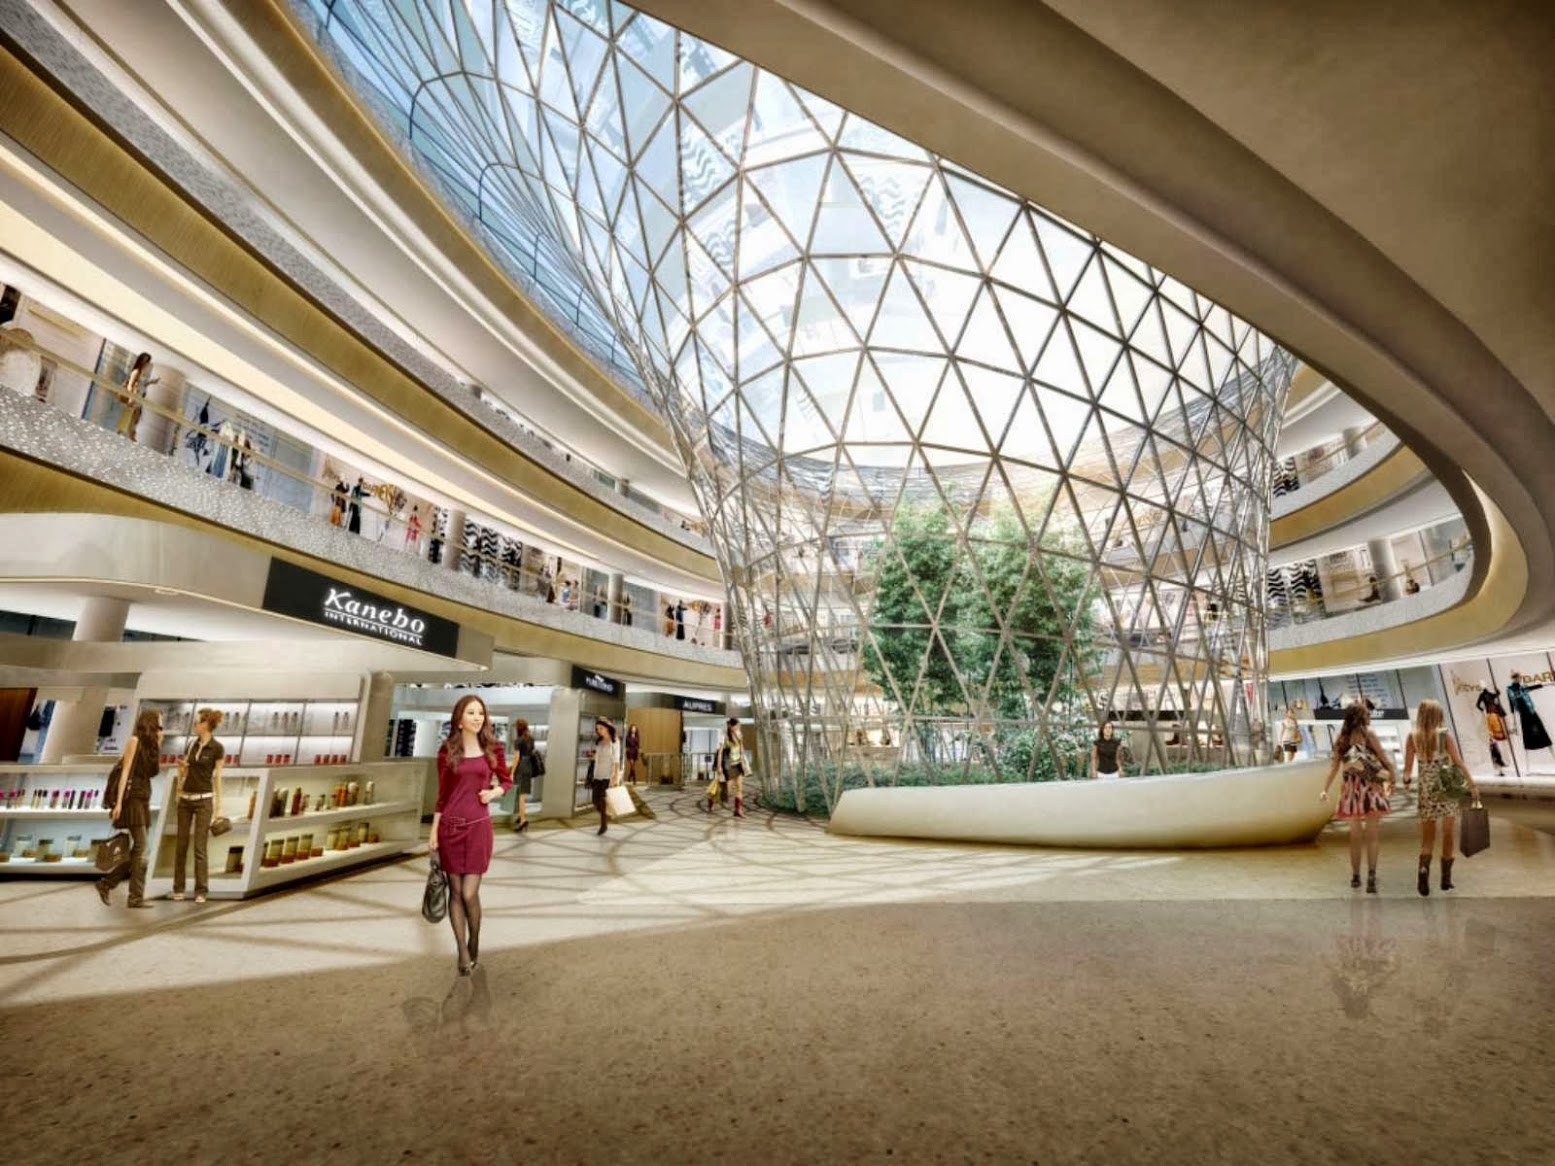 Haitang Bay International Shopping Centre by Hassell